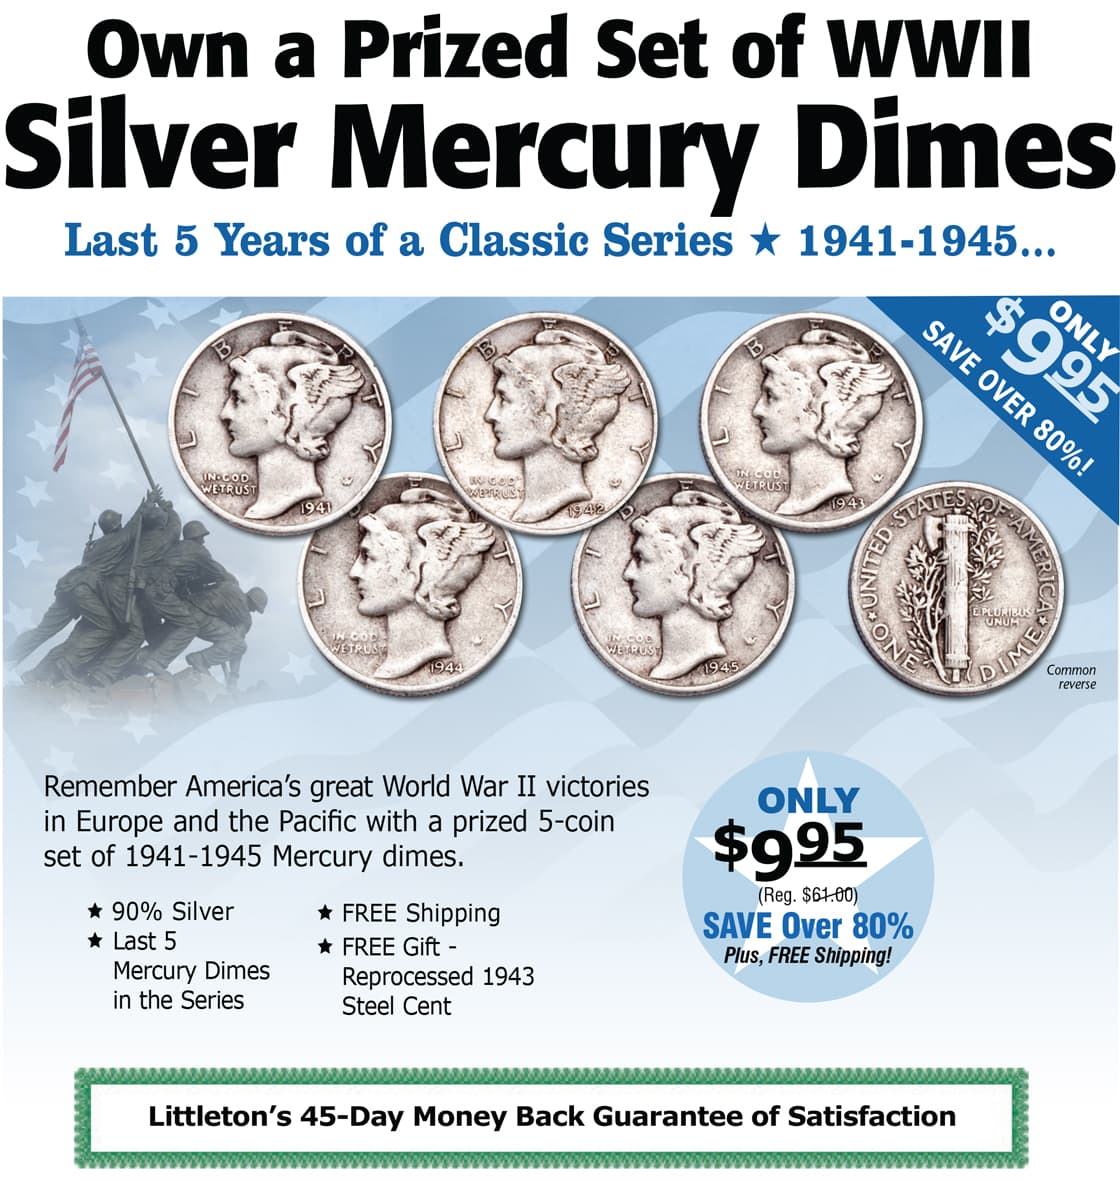 Own a Prized Set of WWII Silver Mercury Dimes